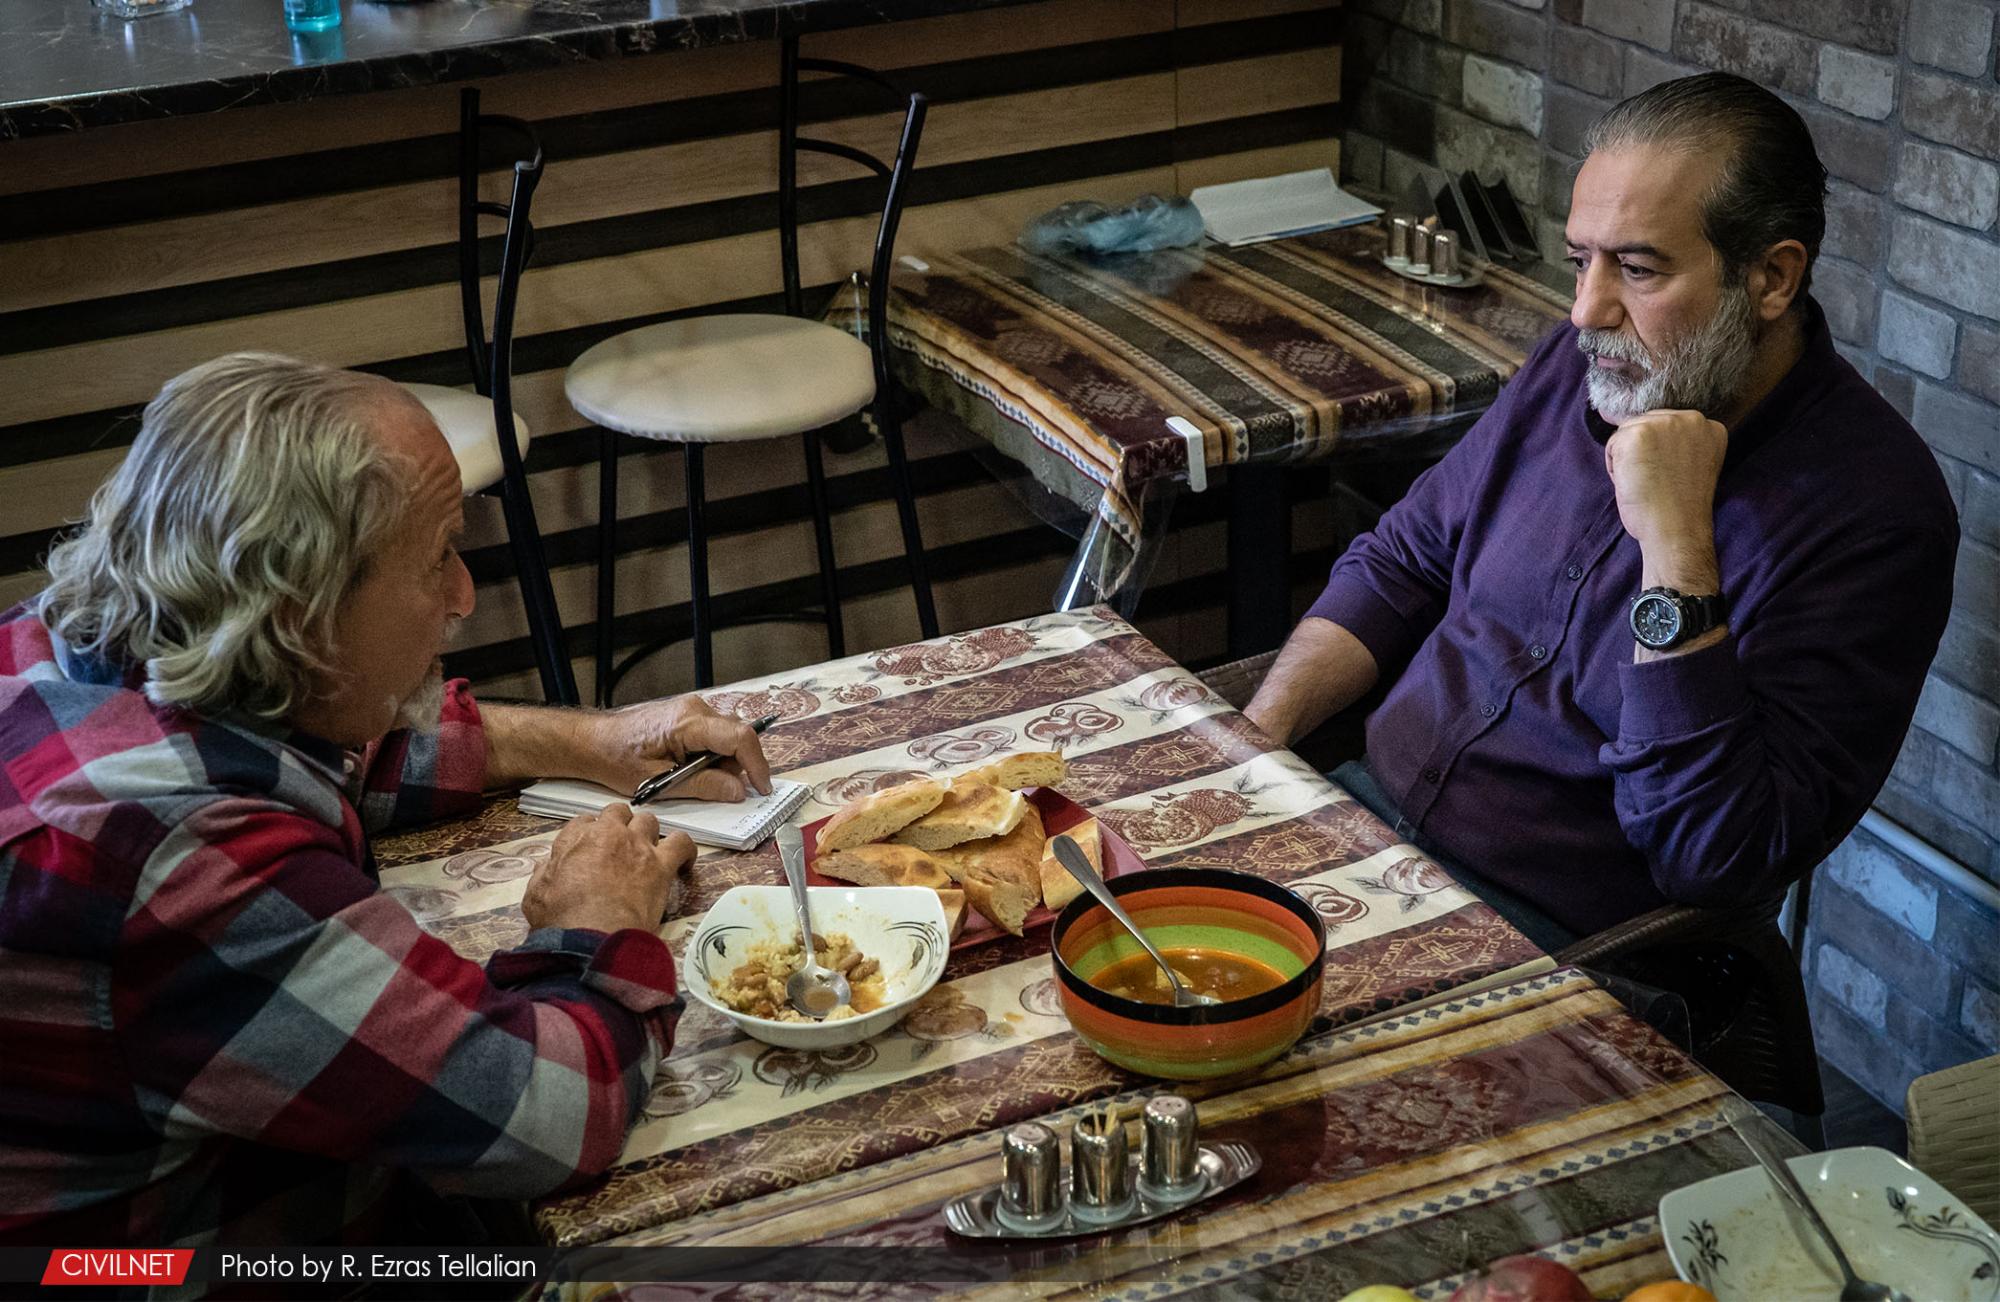 "Eat it and don't ask", War Soup in Karabakh